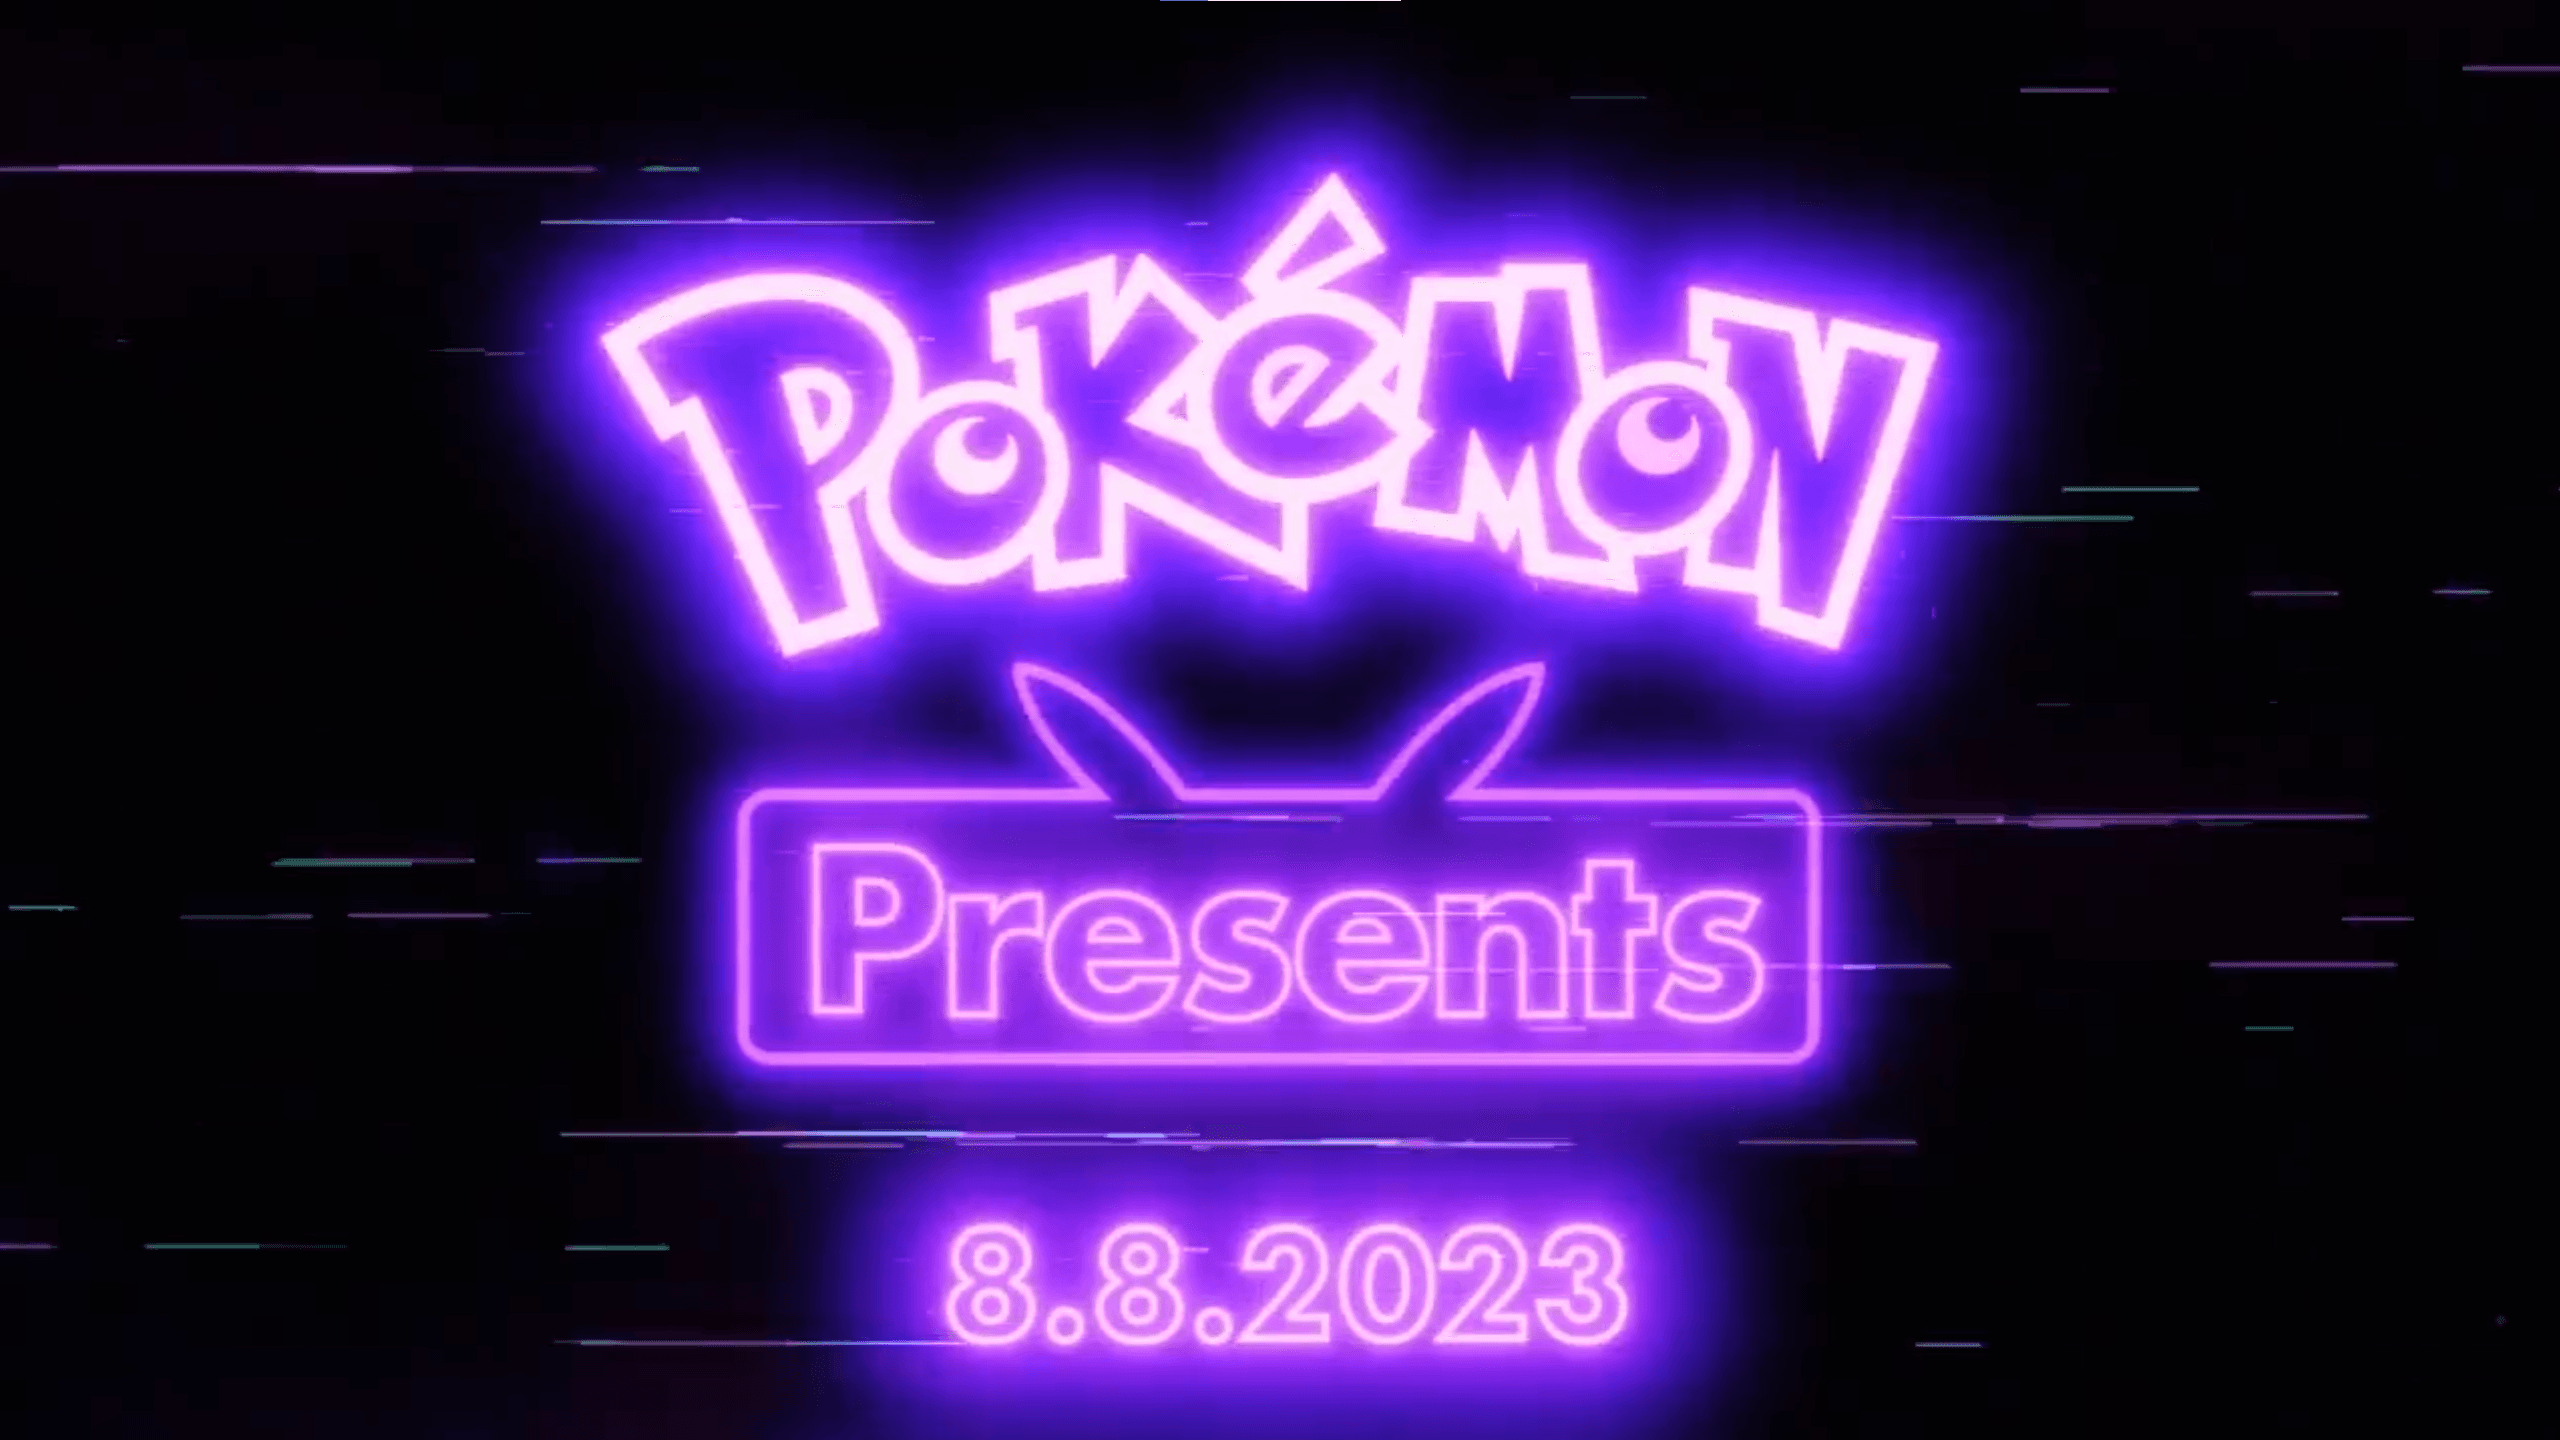 An advertisement for the Pokémon Presents on a black background with neon purple lettering